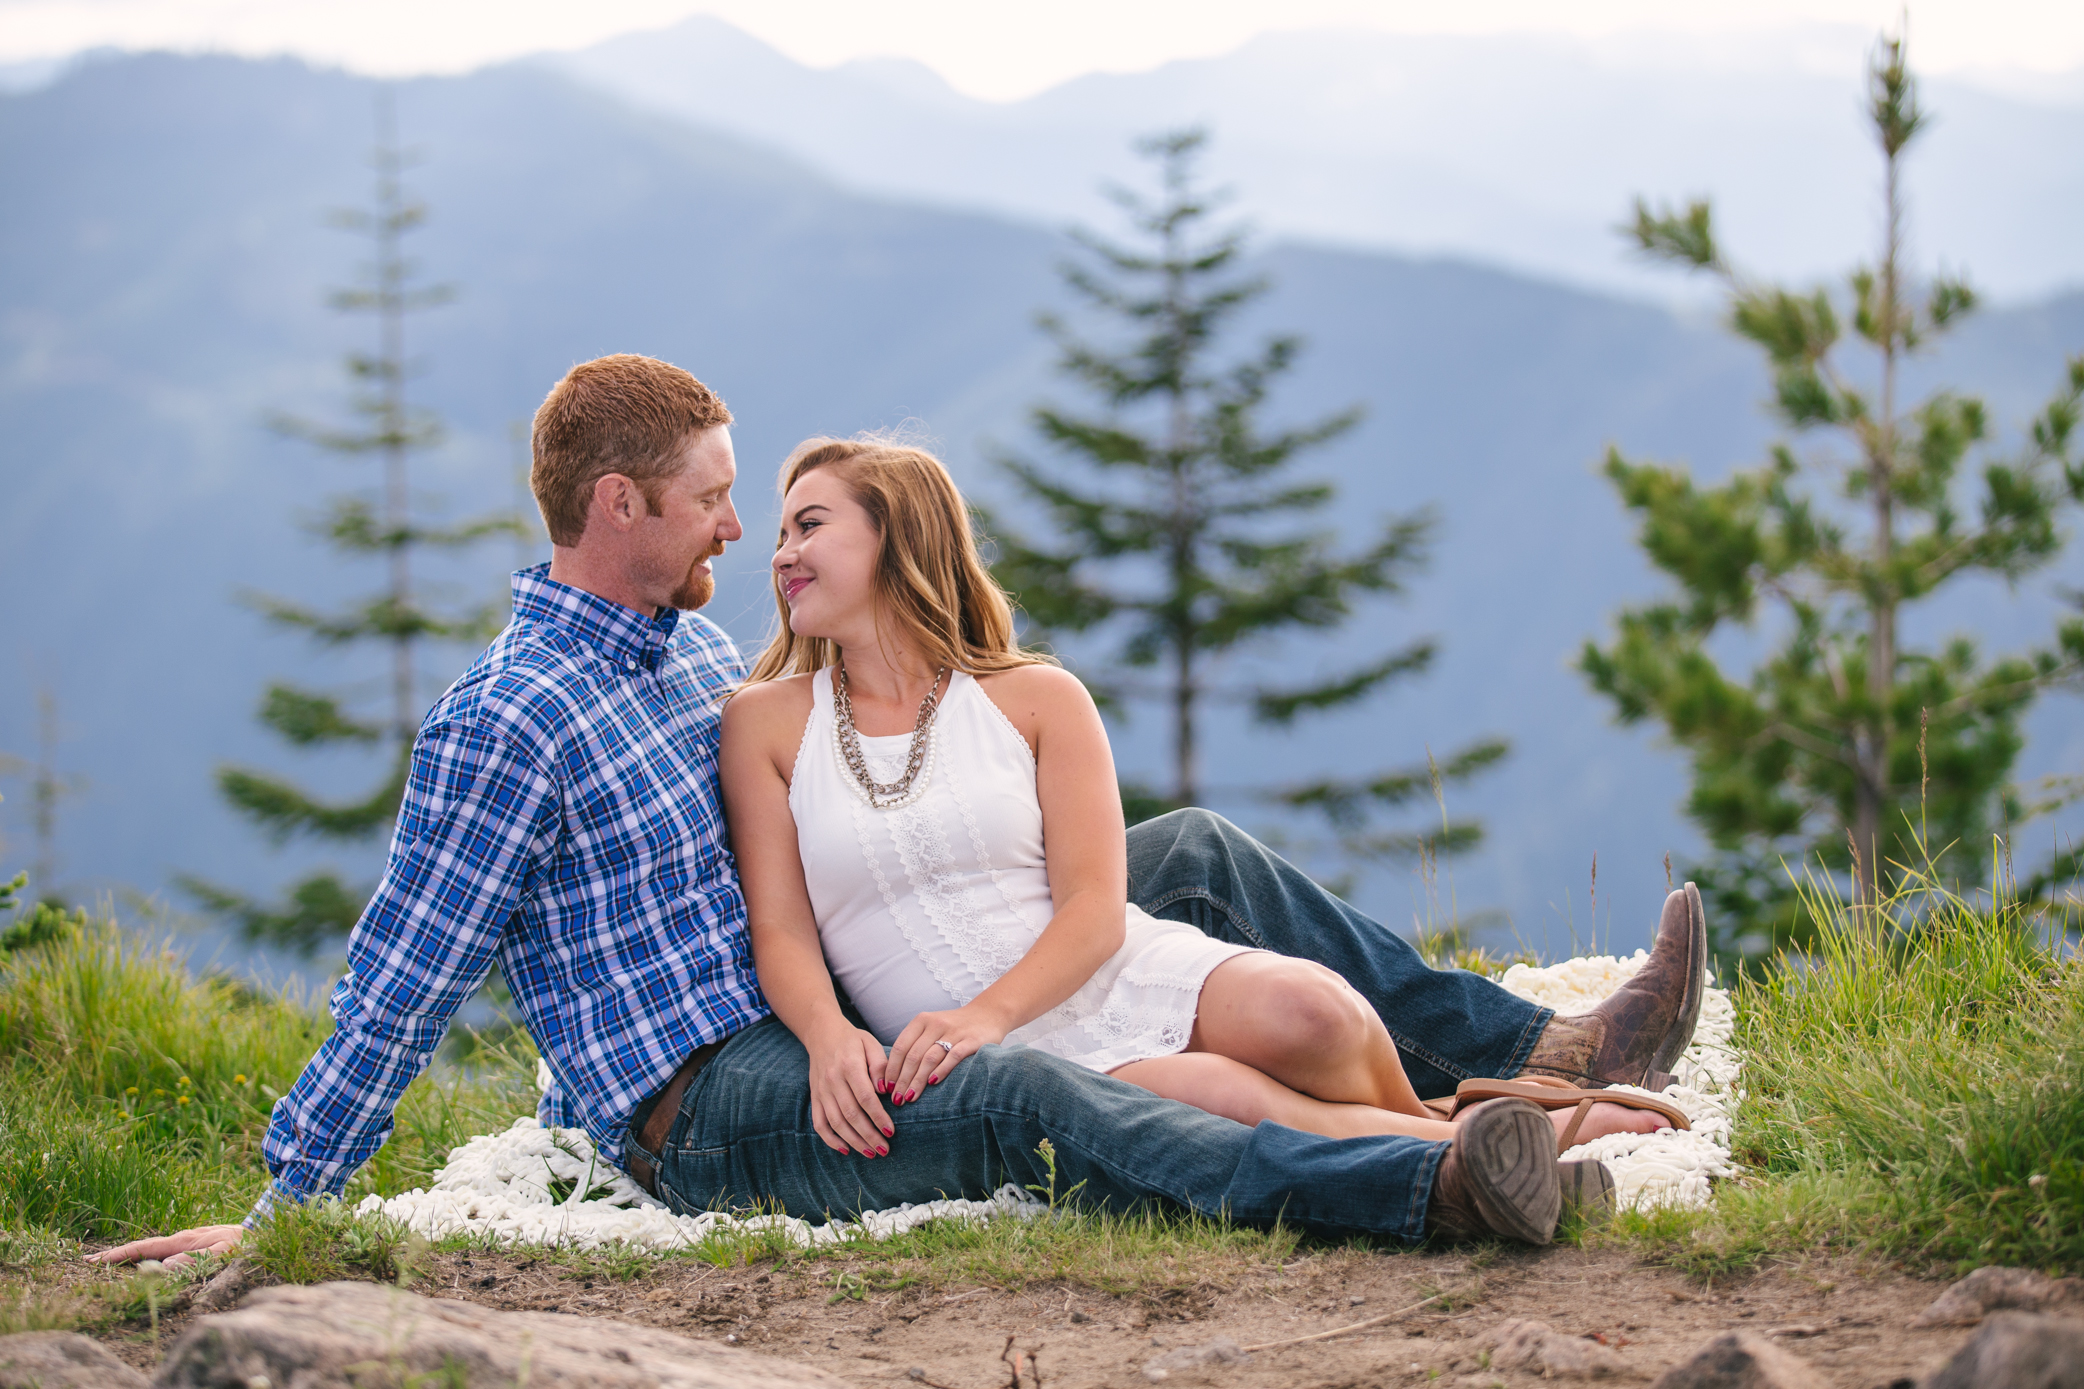 Style tips for amazing engagement pictures.